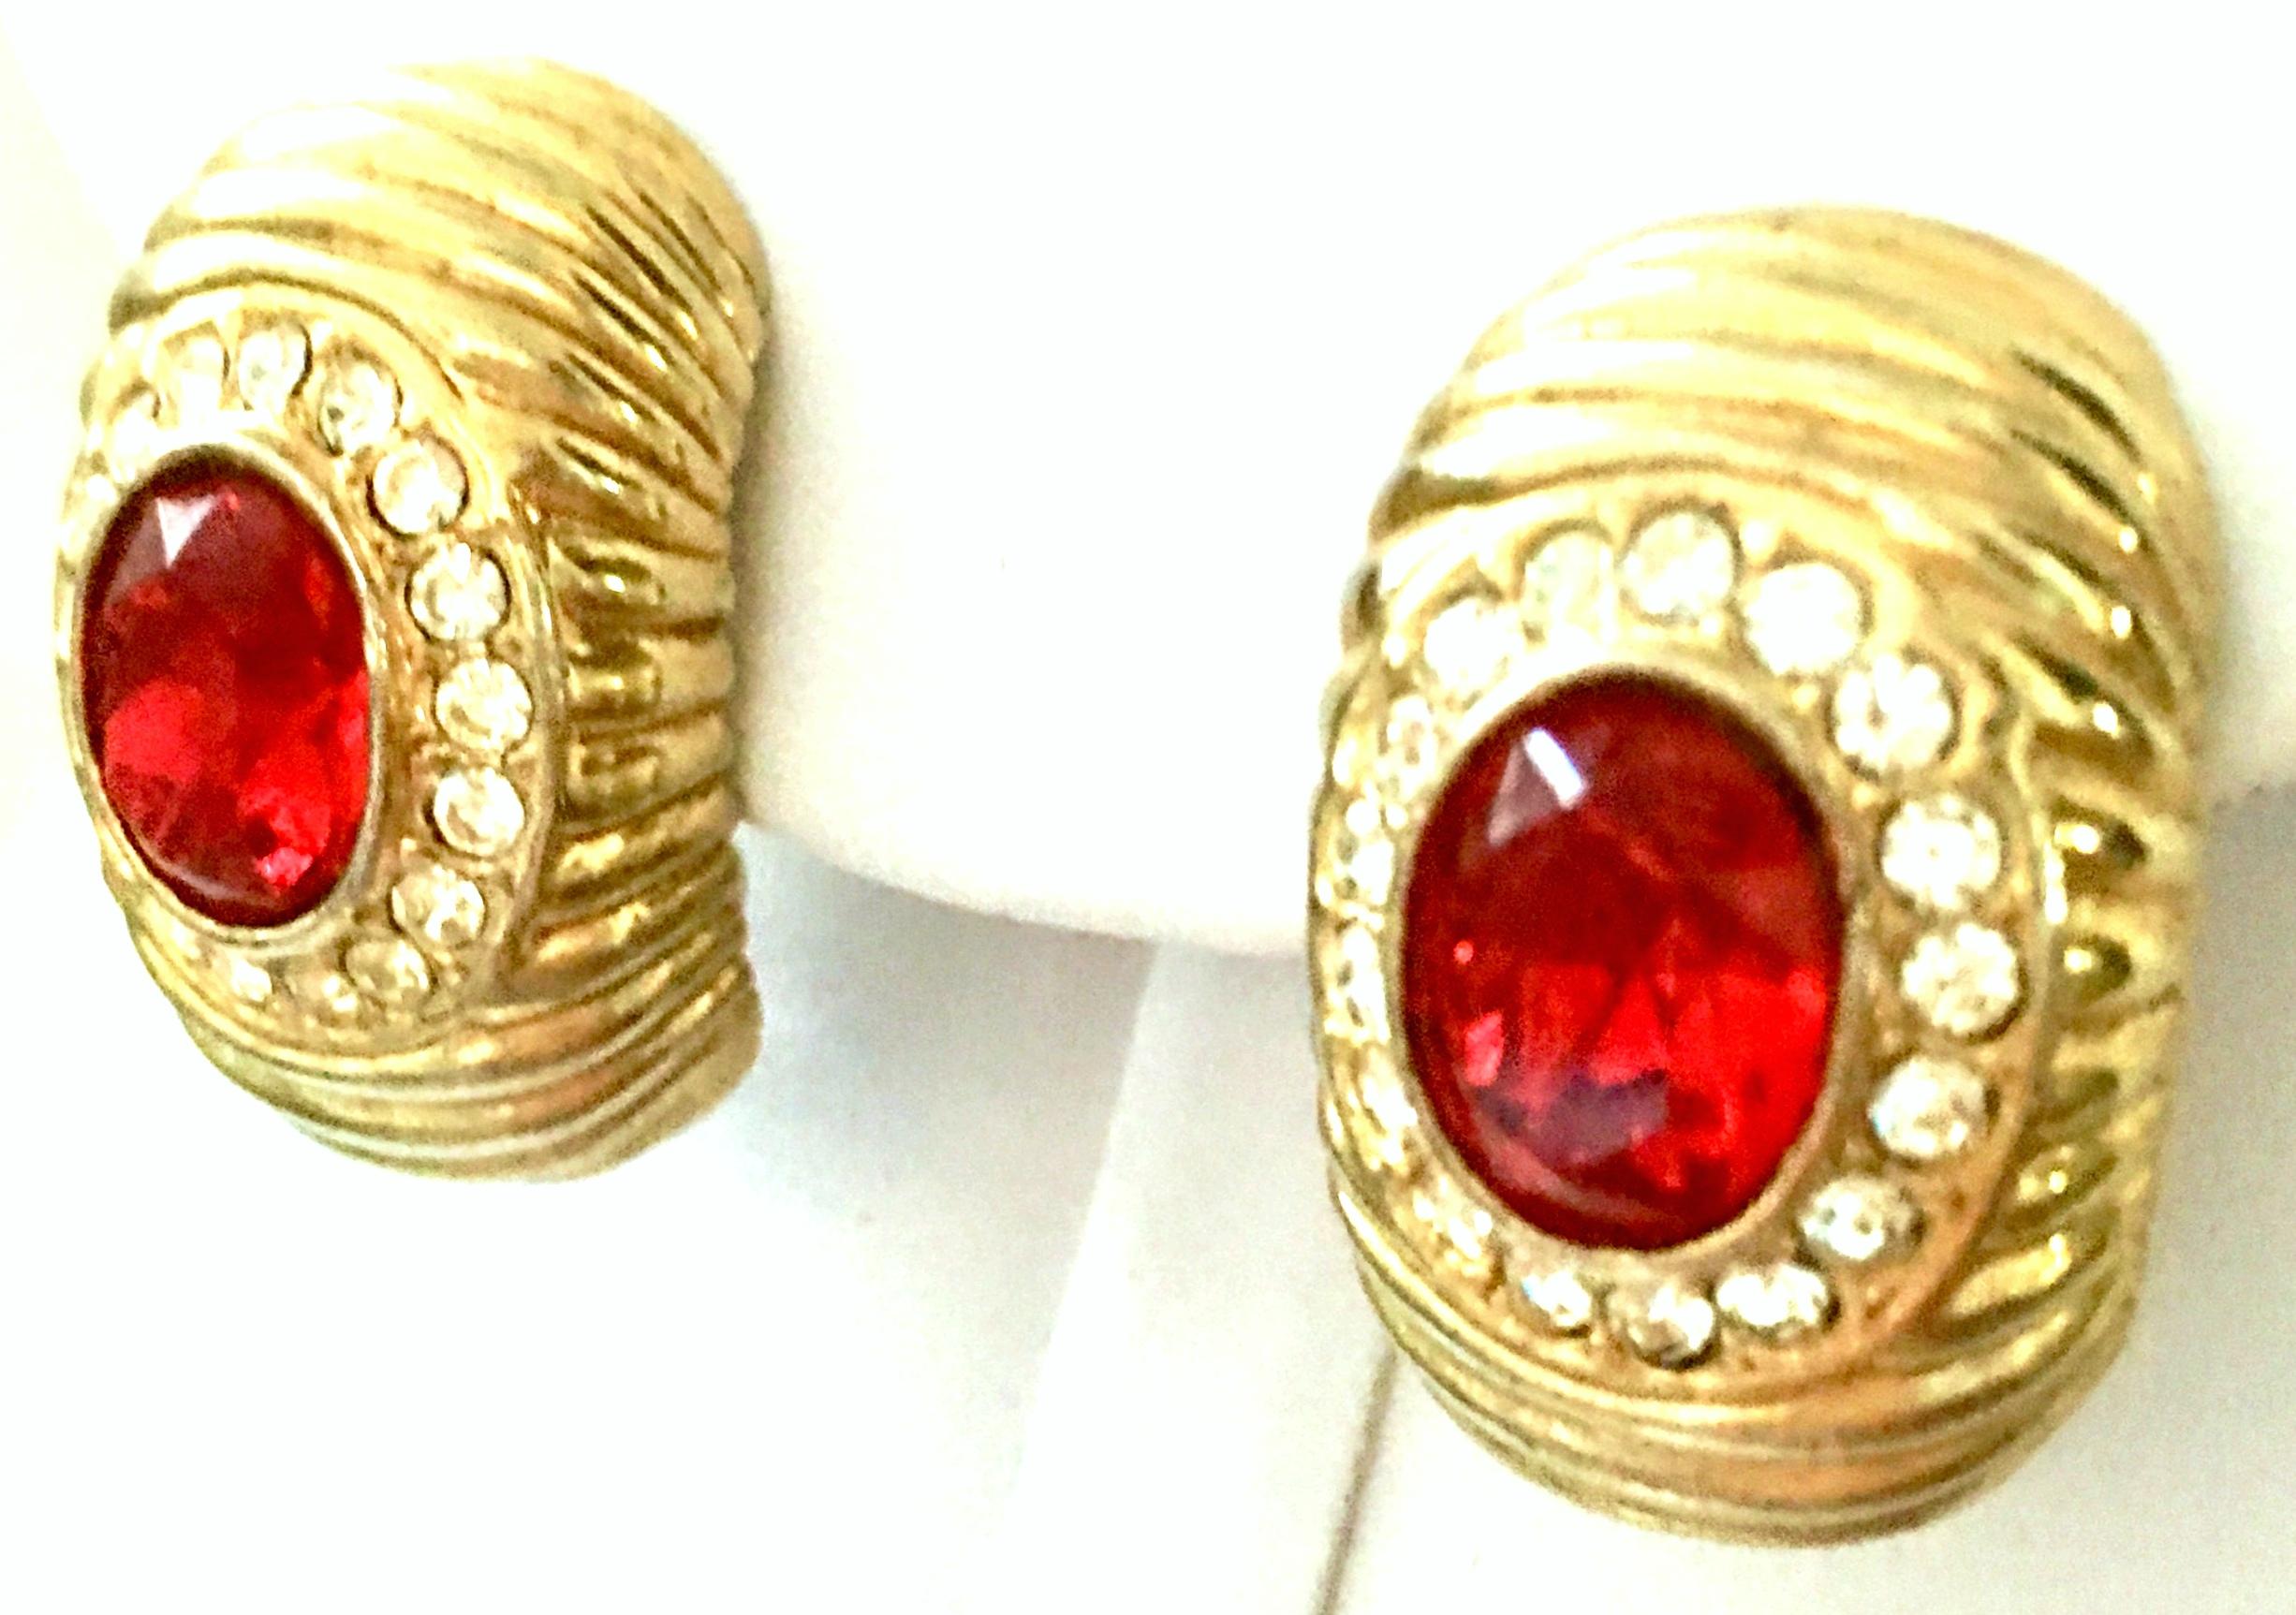 20th Century Gold & Swarovski Cry stal Earrings By, Christian Dior In Good Condition For Sale In West Palm Beach, FL